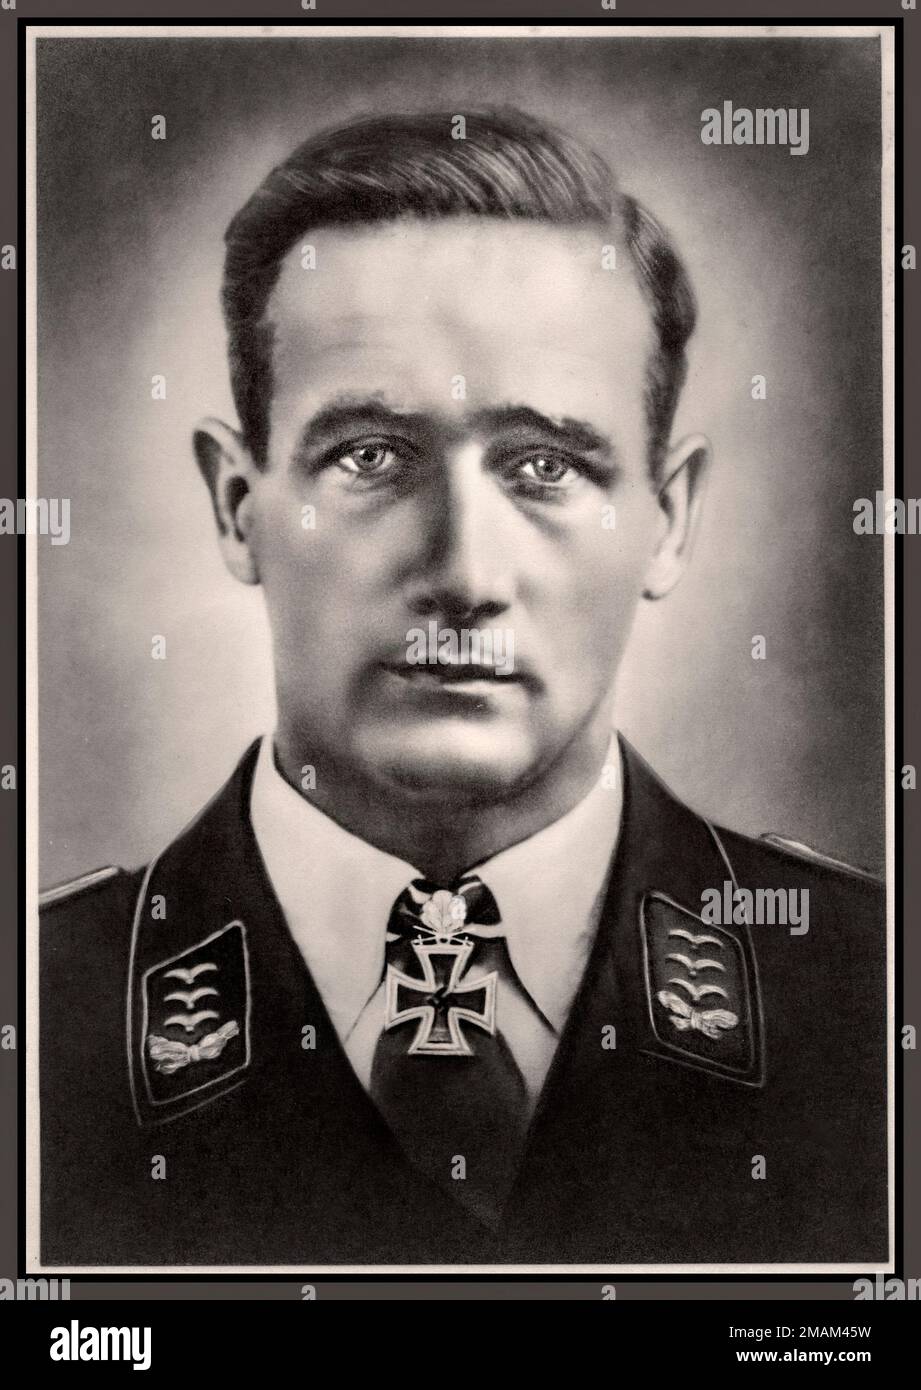 Gordon Gollob (16 June 1912 – 7 September 1987) was a Nazi Austrian fighter pilot during World War II. A fighter ace, he was credited with 150 enemy aircraft shot down in over 340 combat missions. Gollob claimed the majority of his victories over the Eastern Front, and six over the Western Front. Gollob volunteered for military service in the Austrian Armed Forces in 1933. In March 1938, following the Anschluss, the annexation of Austria into Nazi Germany, Gollob was transferred to the Luftwaffe. In 1939, Gollob was posted to Zerstörergeschwader 76 (ZG 76—76th Destroyer Wing), a heavy fighter Stock Photo